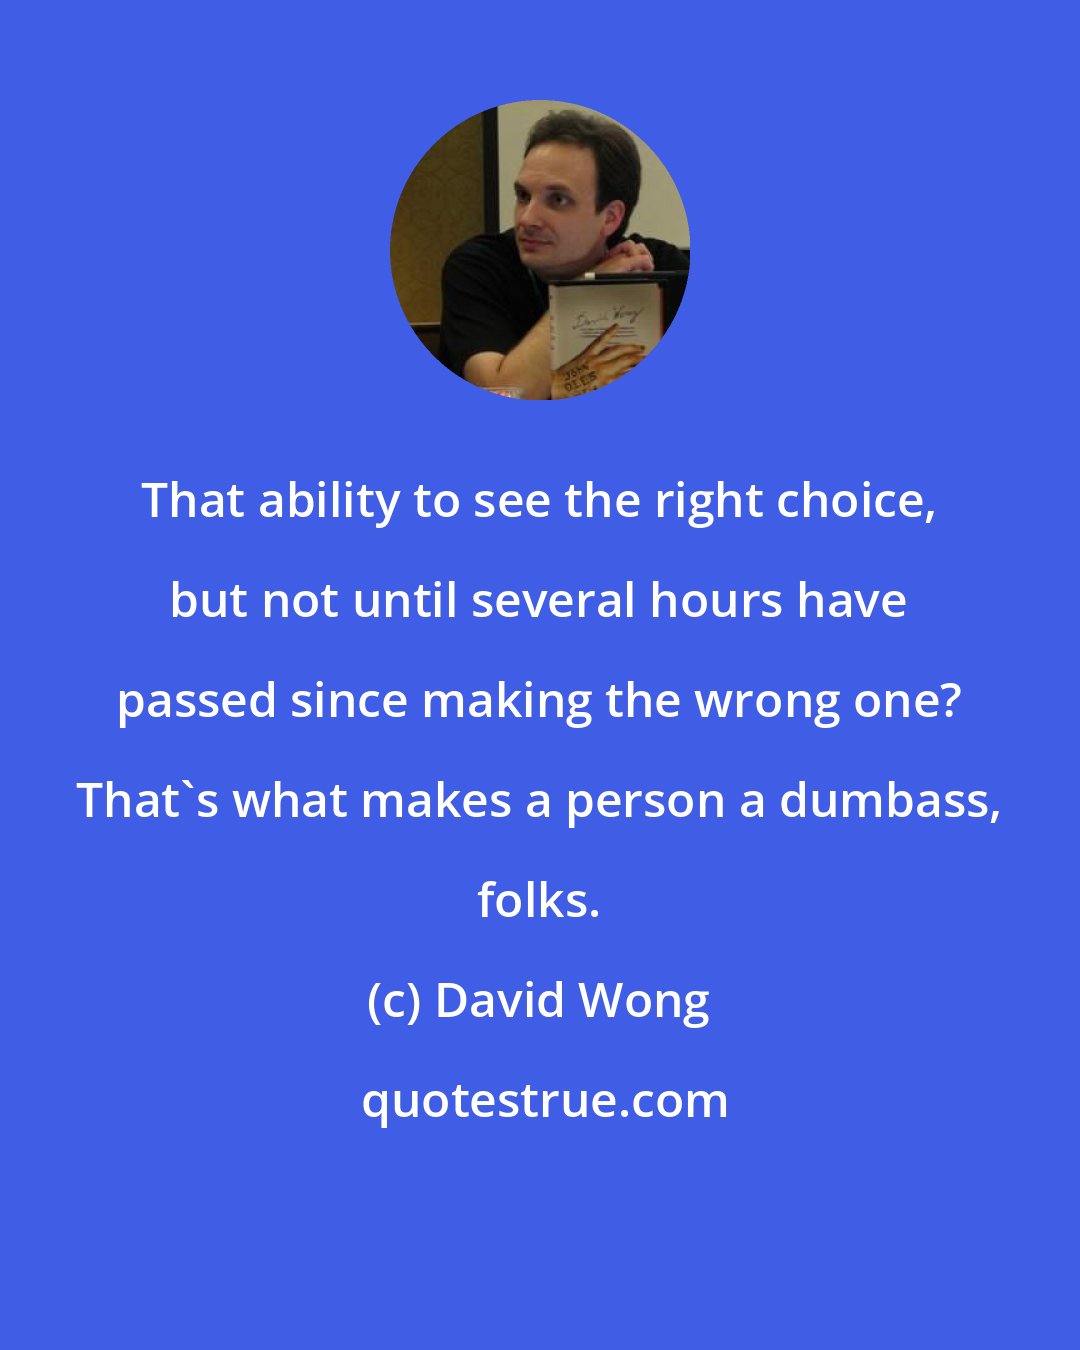 David Wong: That ability to see the right choice, but not until several hours have passed since making the wrong one? That's what makes a person a dumbass, folks.